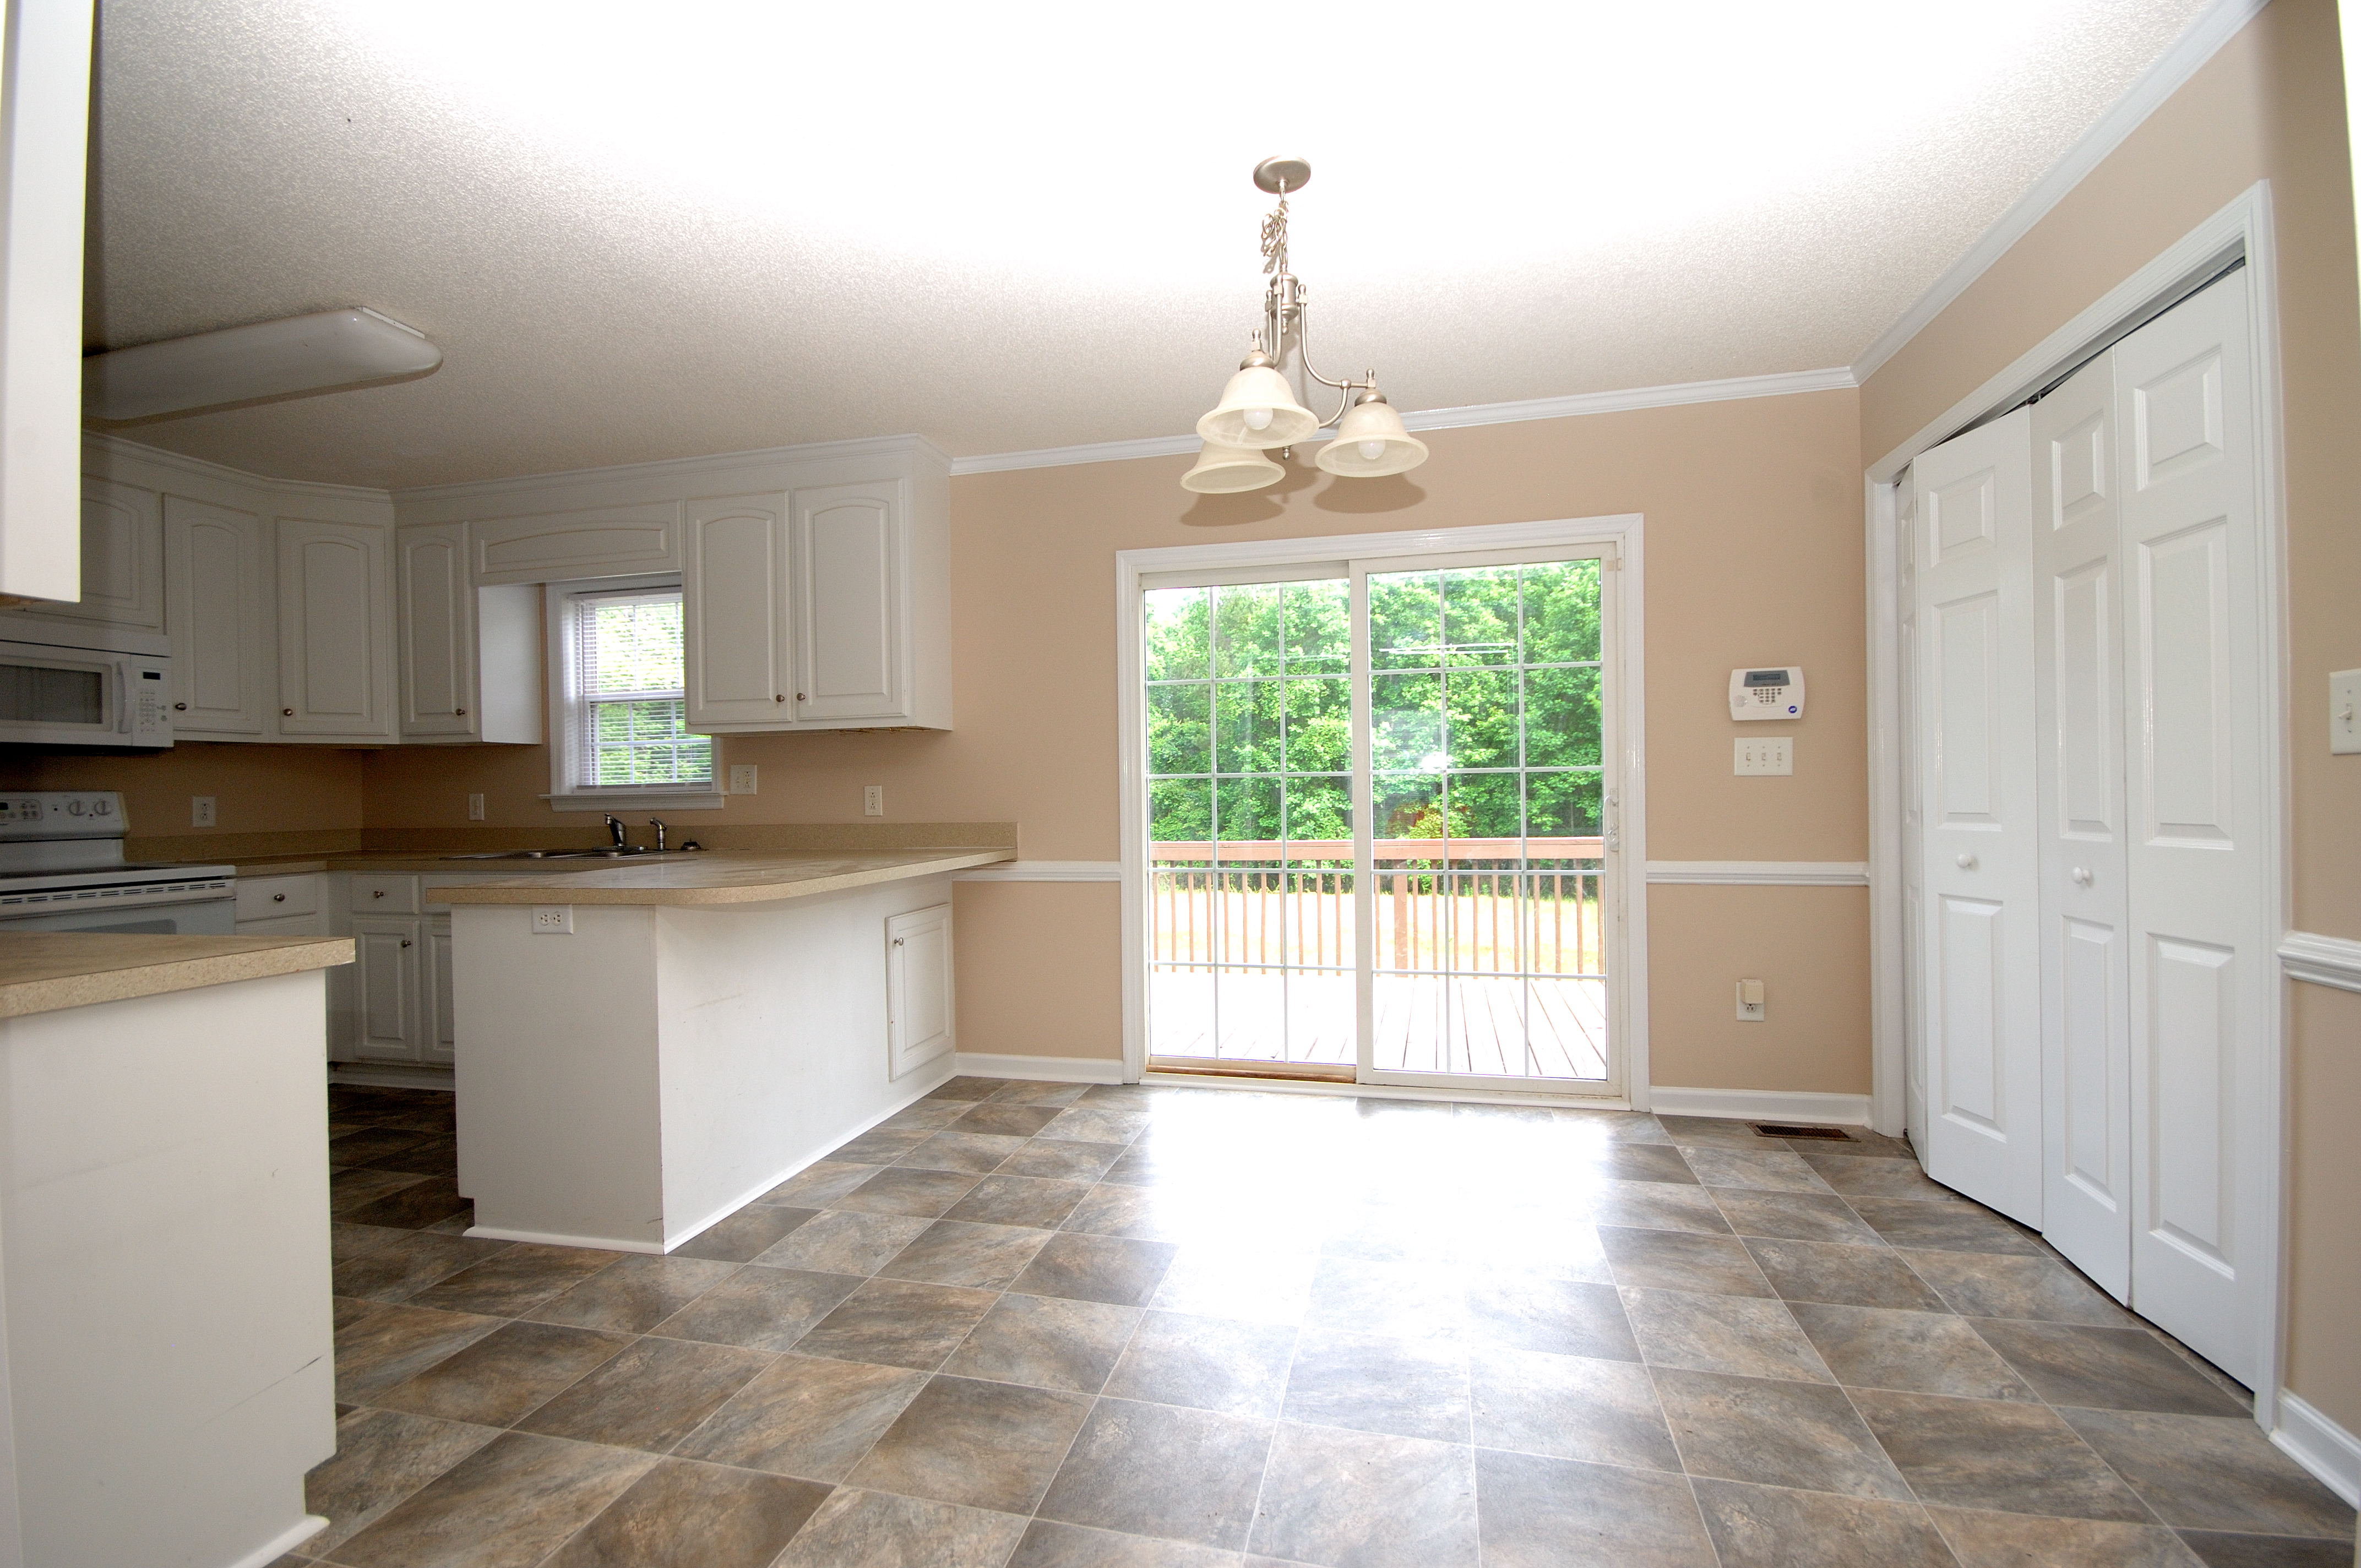 Goldsboro NC - Homes for Rent - 220 Koufax Drive Pikeville NC 27863 - Dining Area